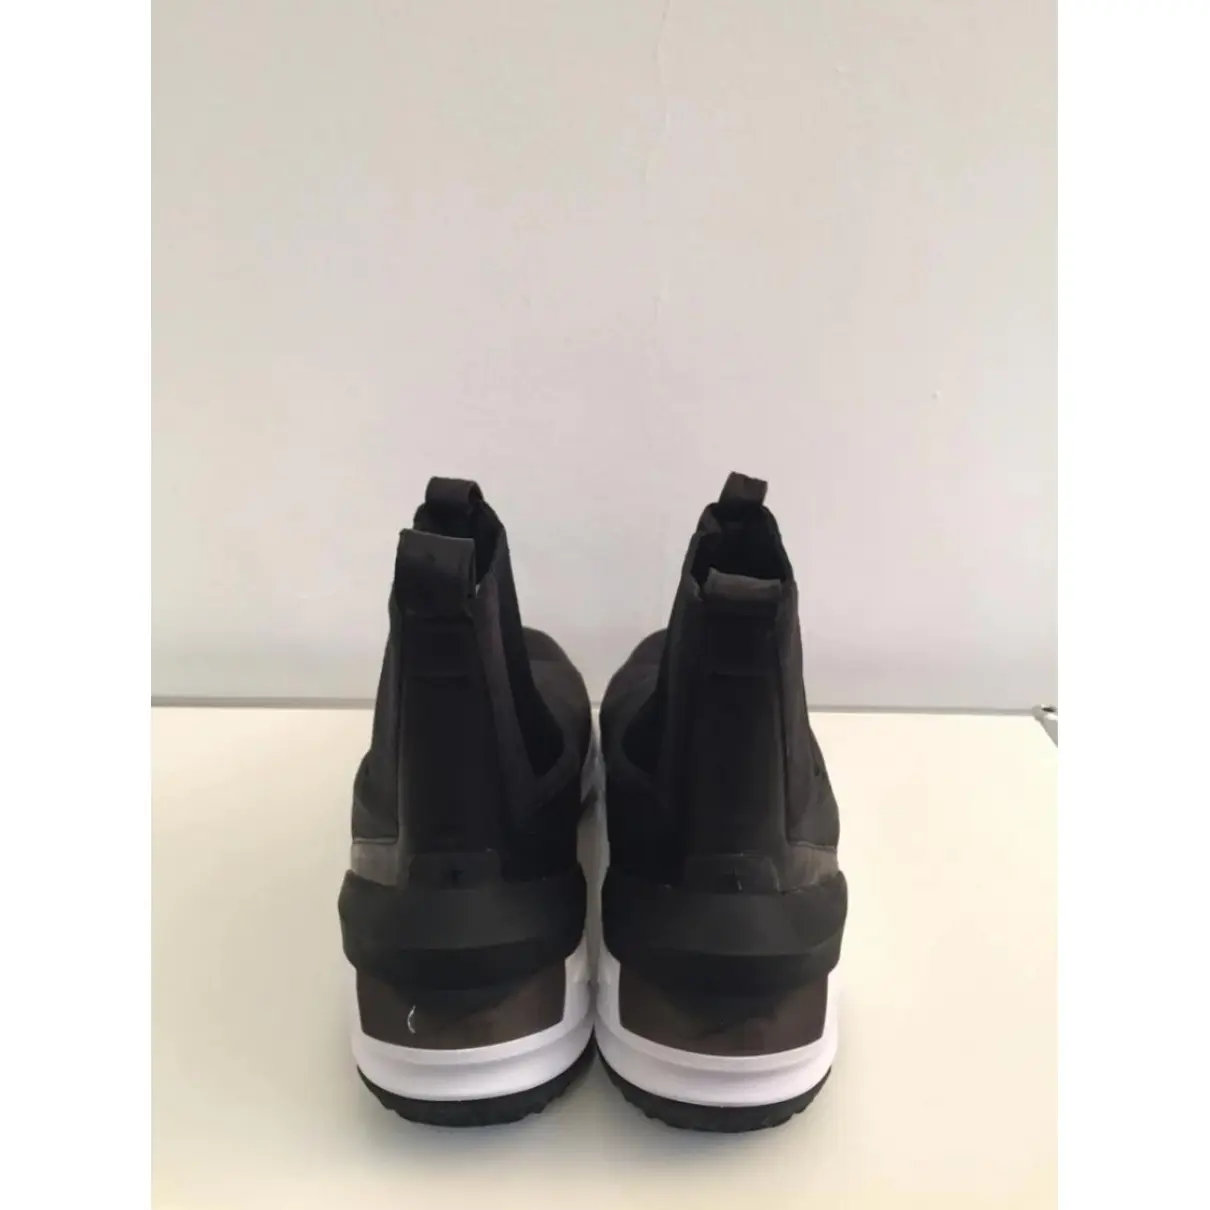 Buy Nike by Riccardo Tisci Cloth high trainers online